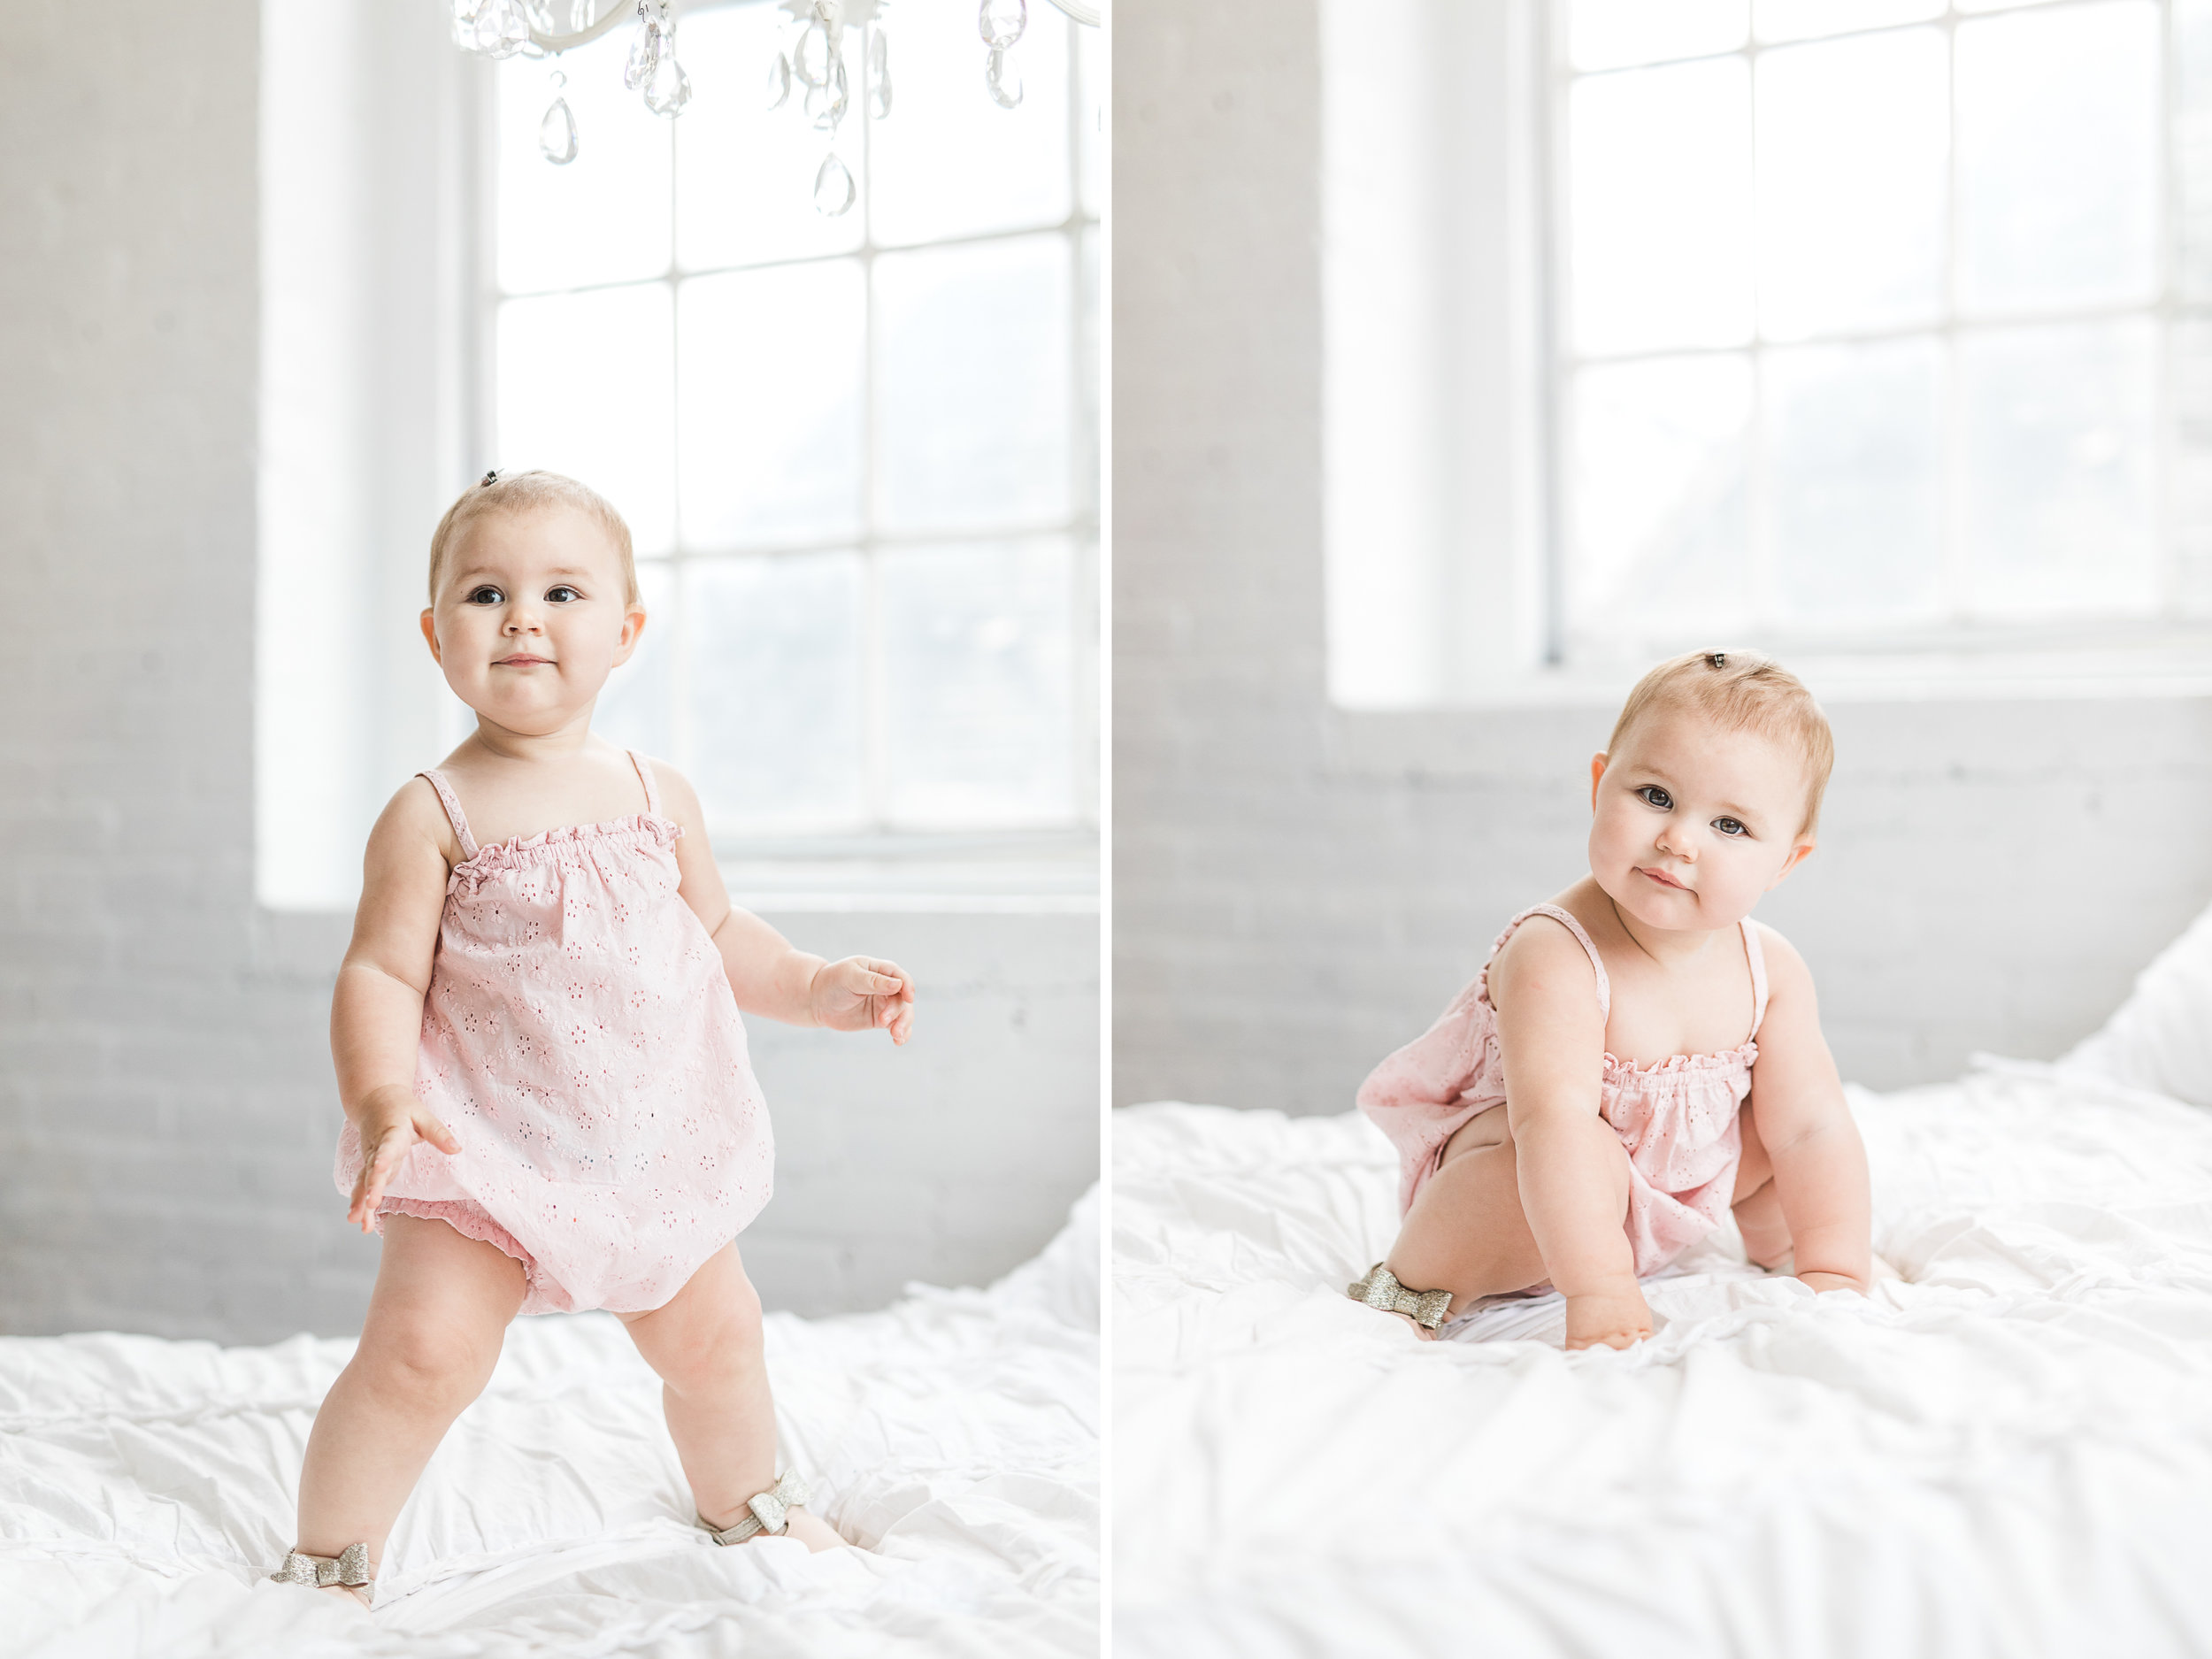 Natural Light Studio Session | One Year Old Baby Girl In Studio | All White Studio | Laurenda Marie Photography